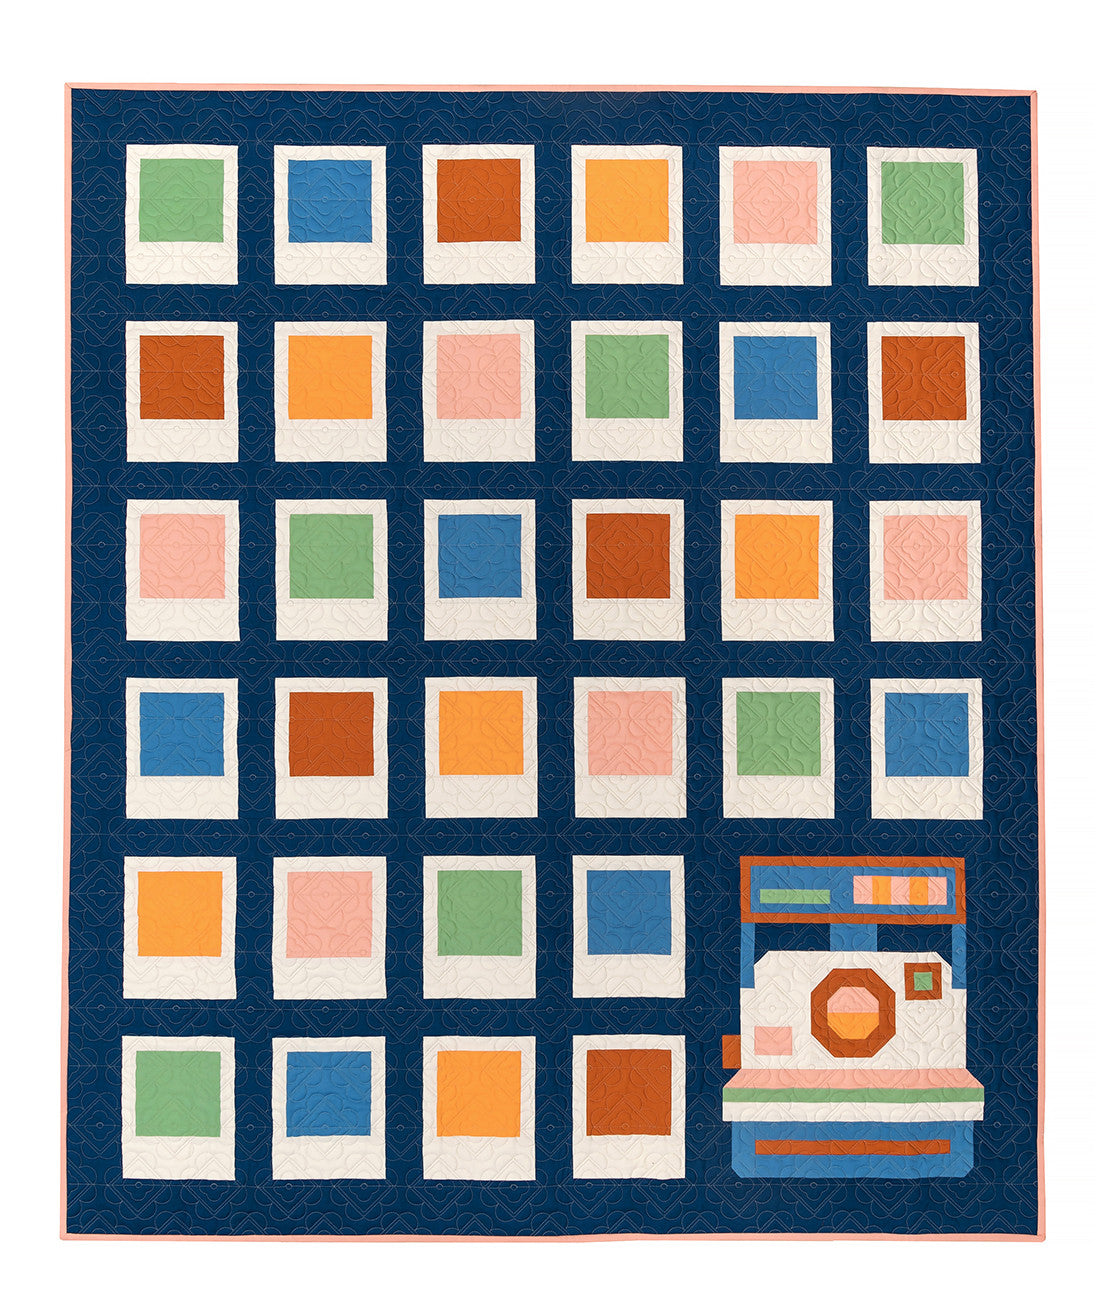 Snap Happy Quilt Pattern by Pen and Paper Patterns